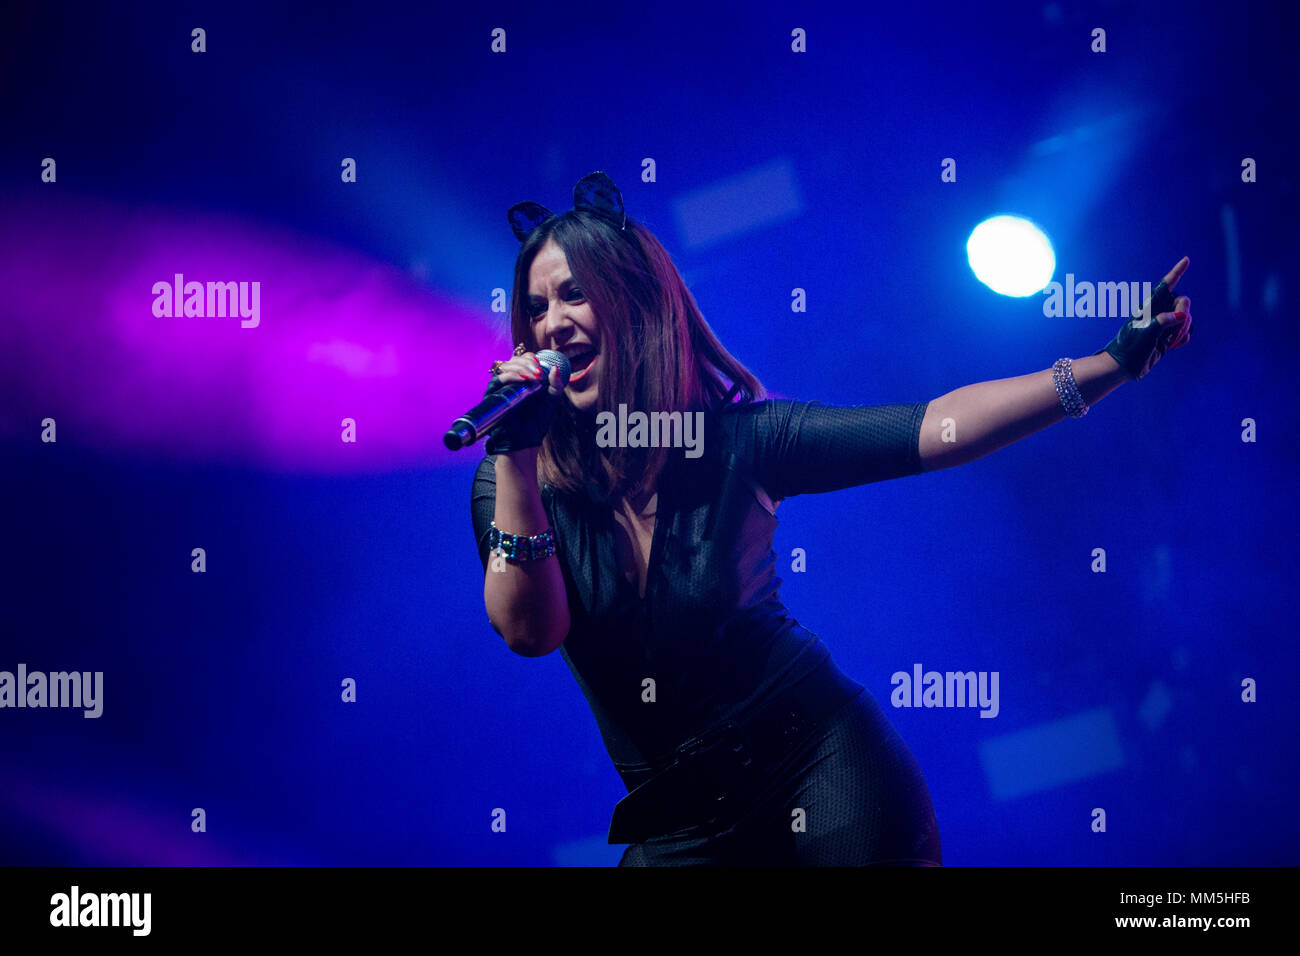 Norway, Bergen - April 30, 2018. The Danish Bubblegum-dance group Hit'n'Hide performs a live concert during the We Love the 90’s show at Bergenshallen in Bergen. Here singer Christina Schack is seen live on stage. (Photo credit: Gonzales Photo - Jarle H. Moe). Stock Photo